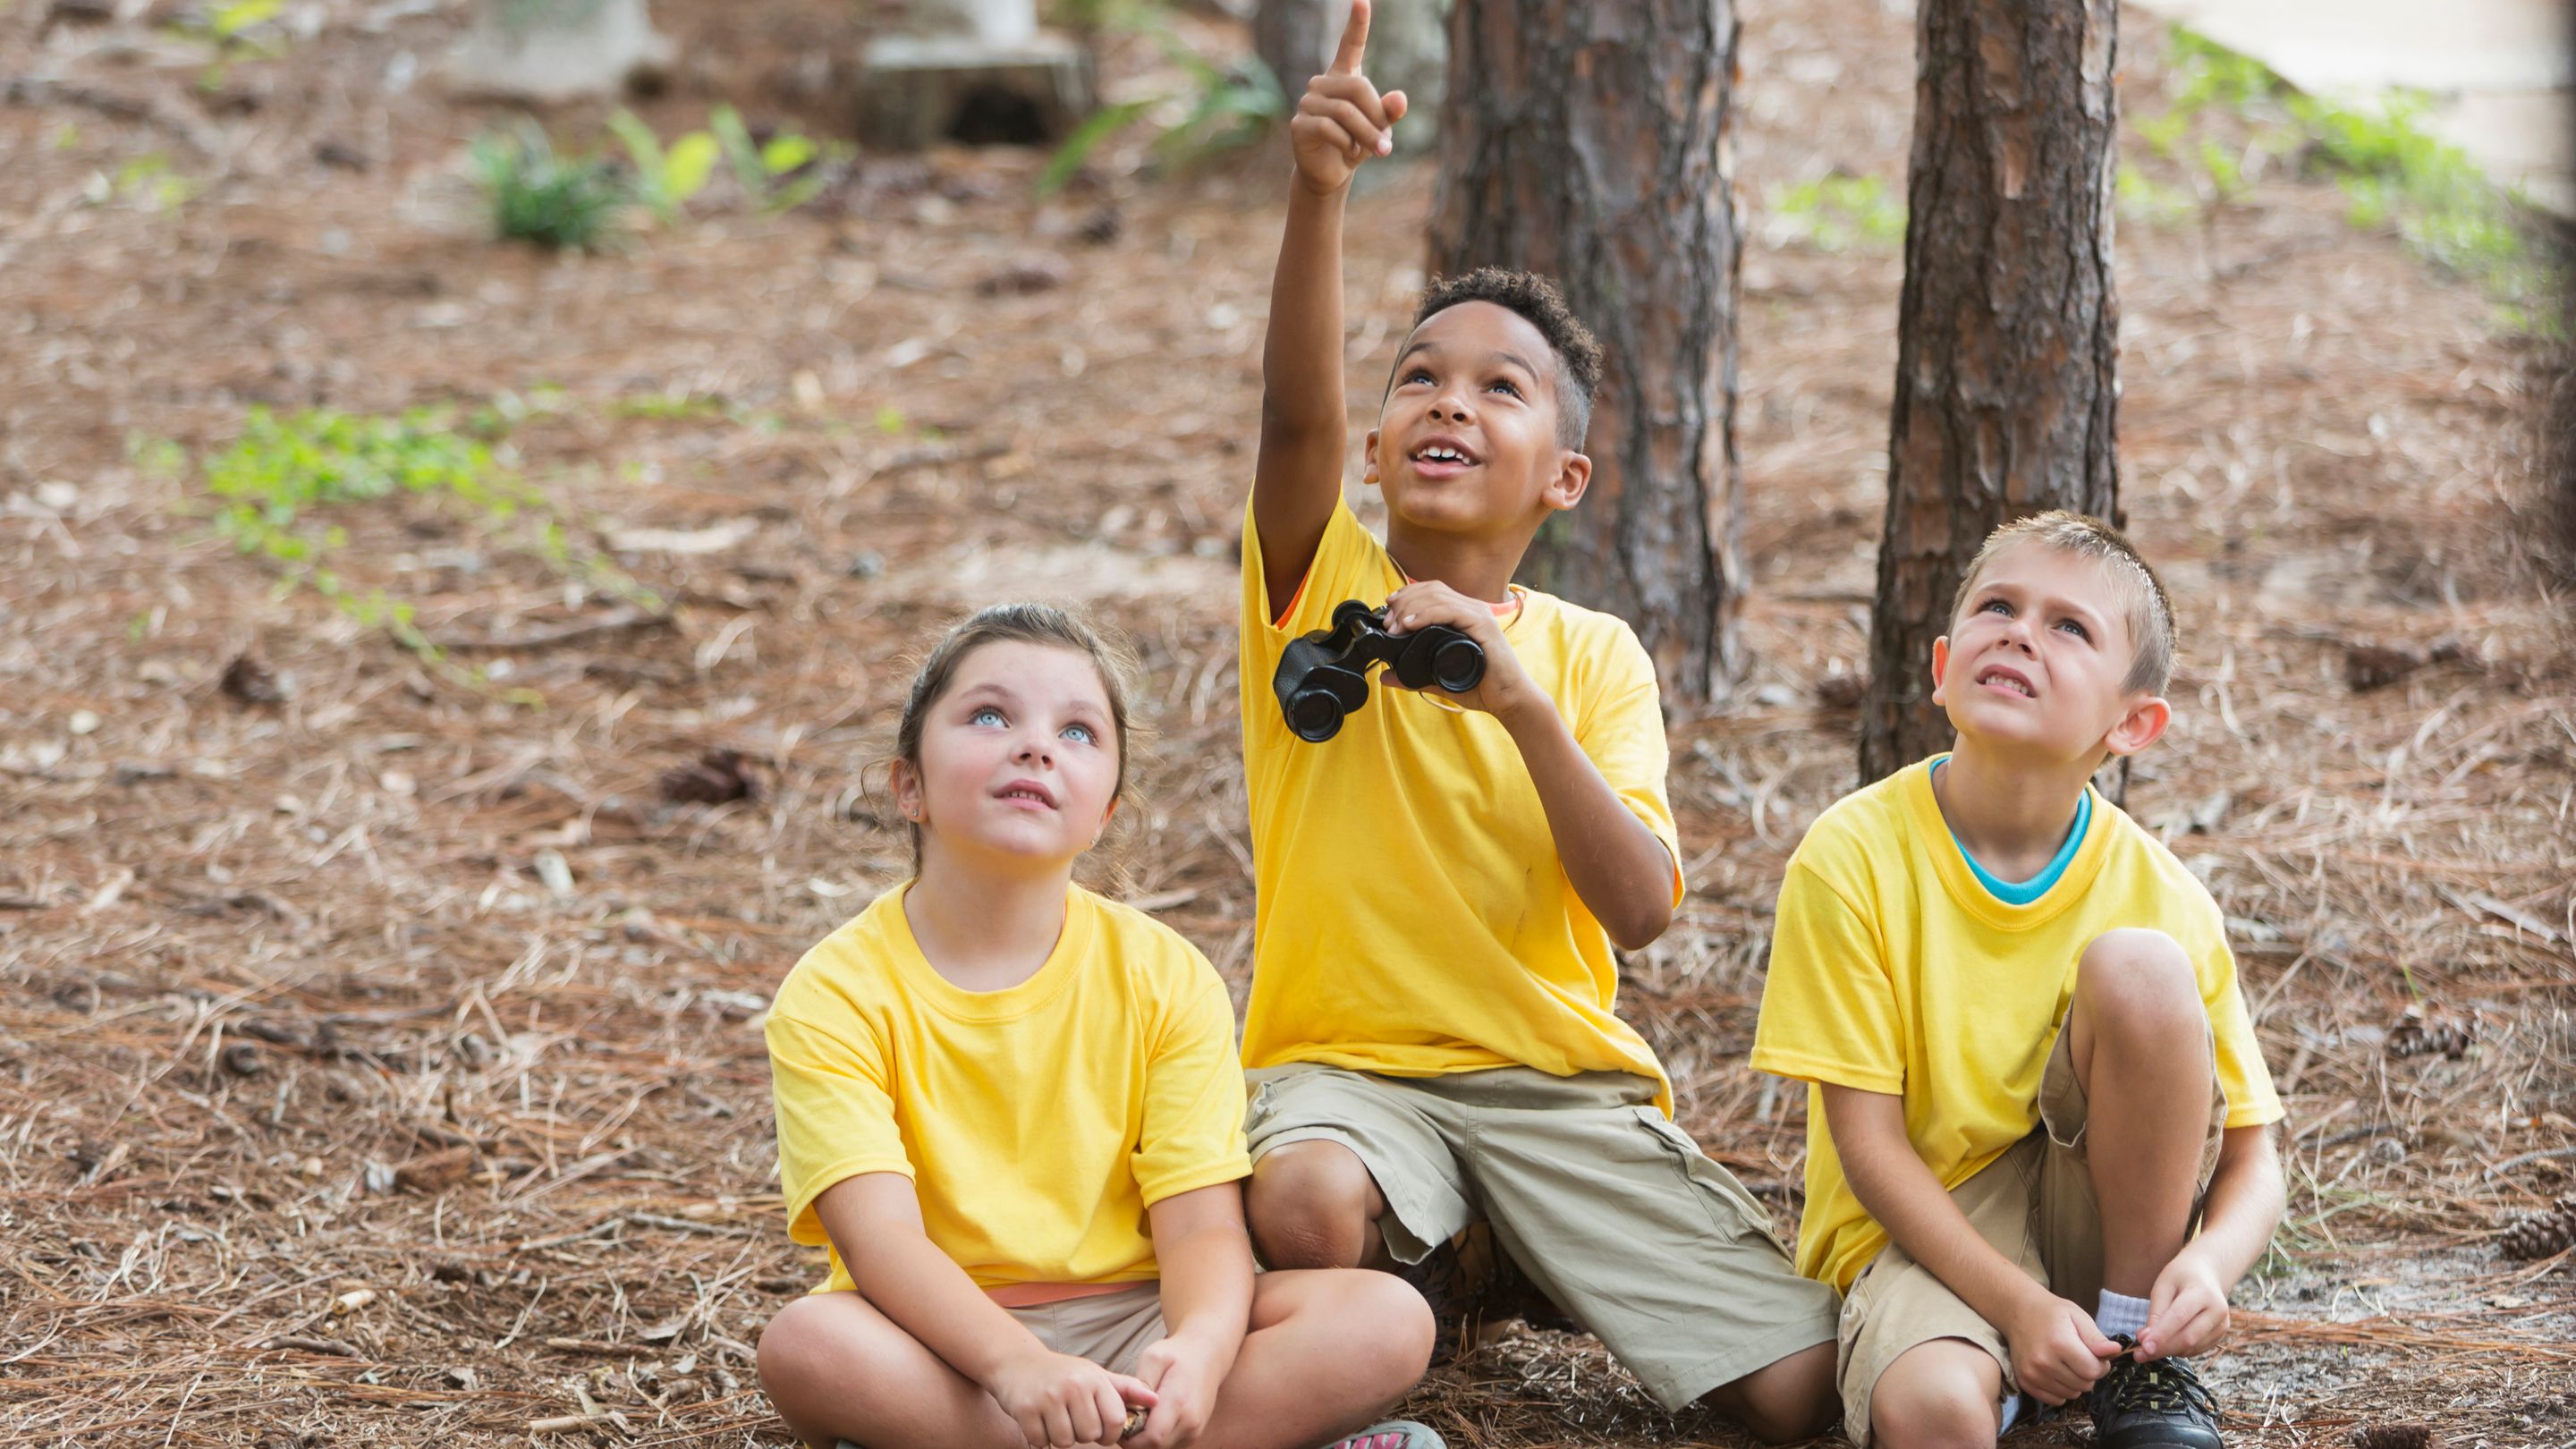 Getting Kids Outdoors With Technology